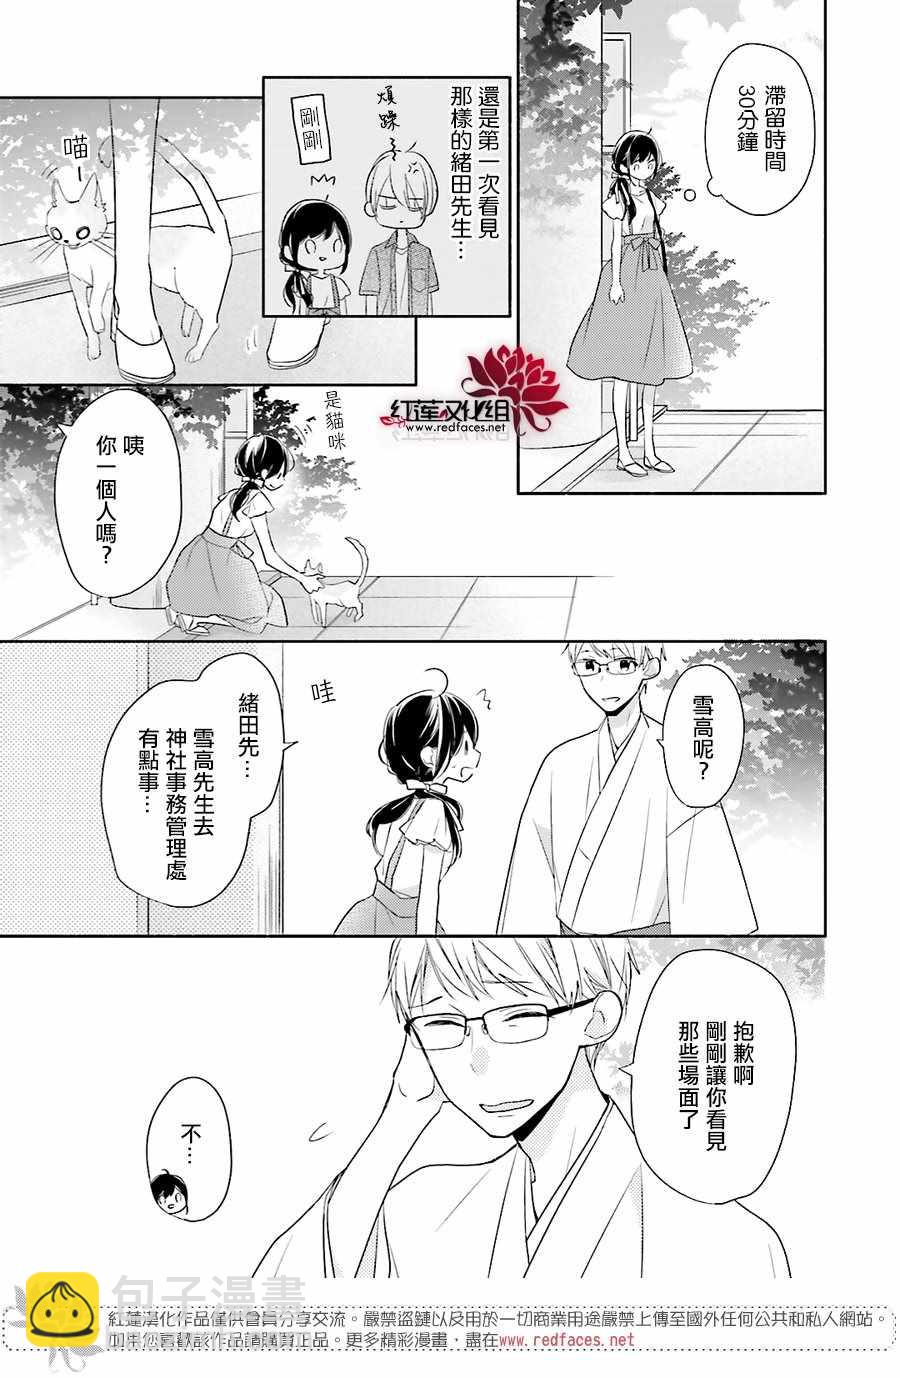 If given a second chance - 11話 - 2